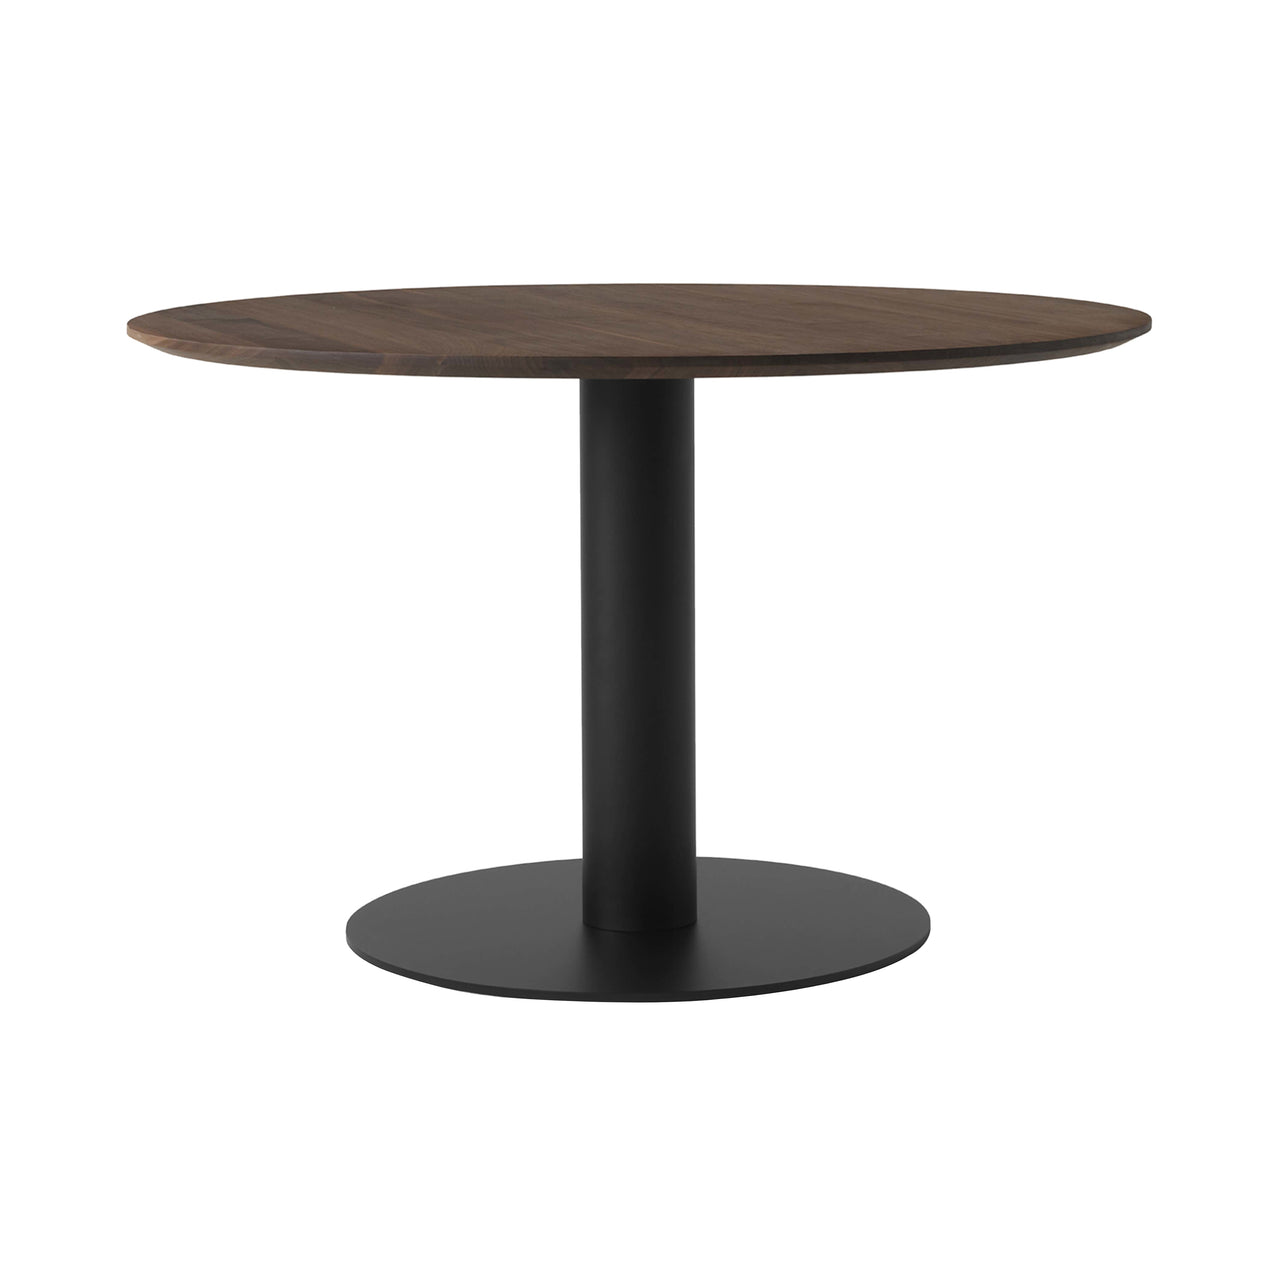 In Between Center Base Dining Table SK11 + SK12 + Large (SK12) - 47.2